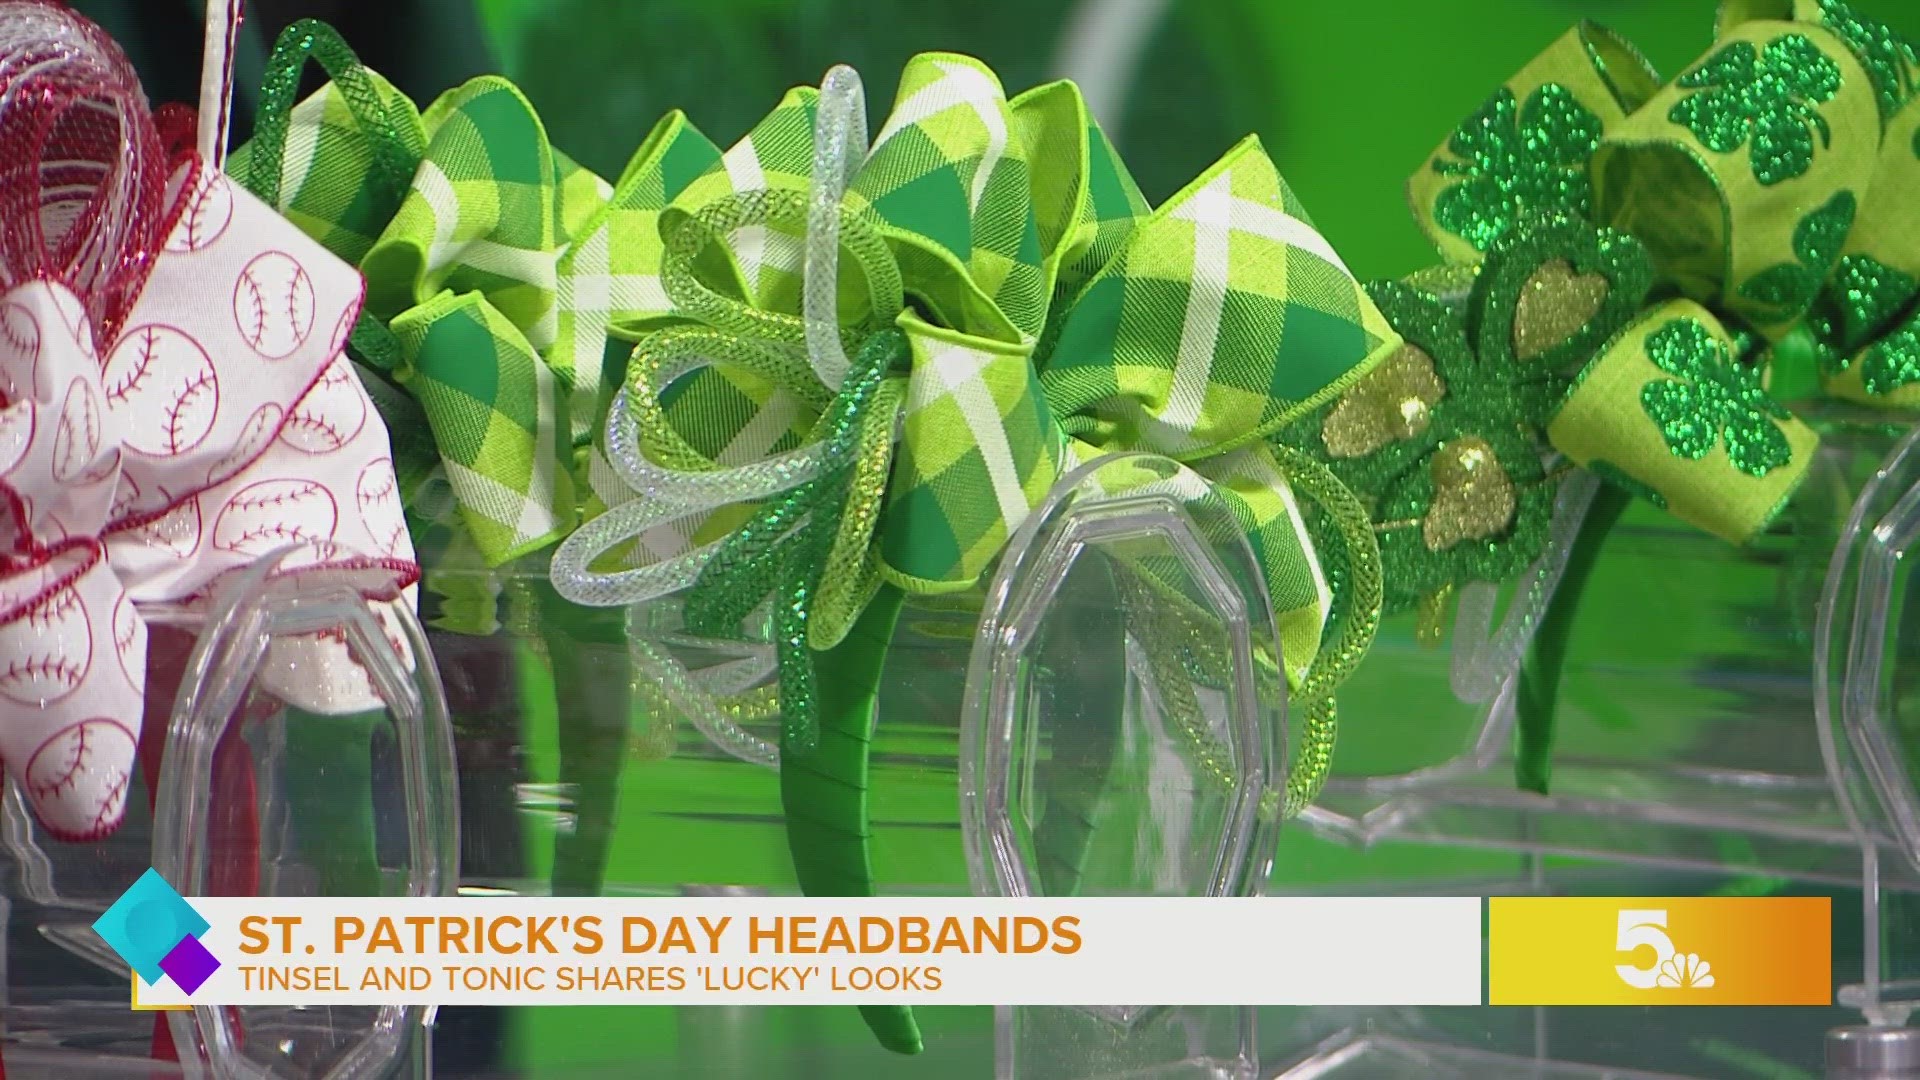 Local small business shares ST. Patrick’s themed headbands